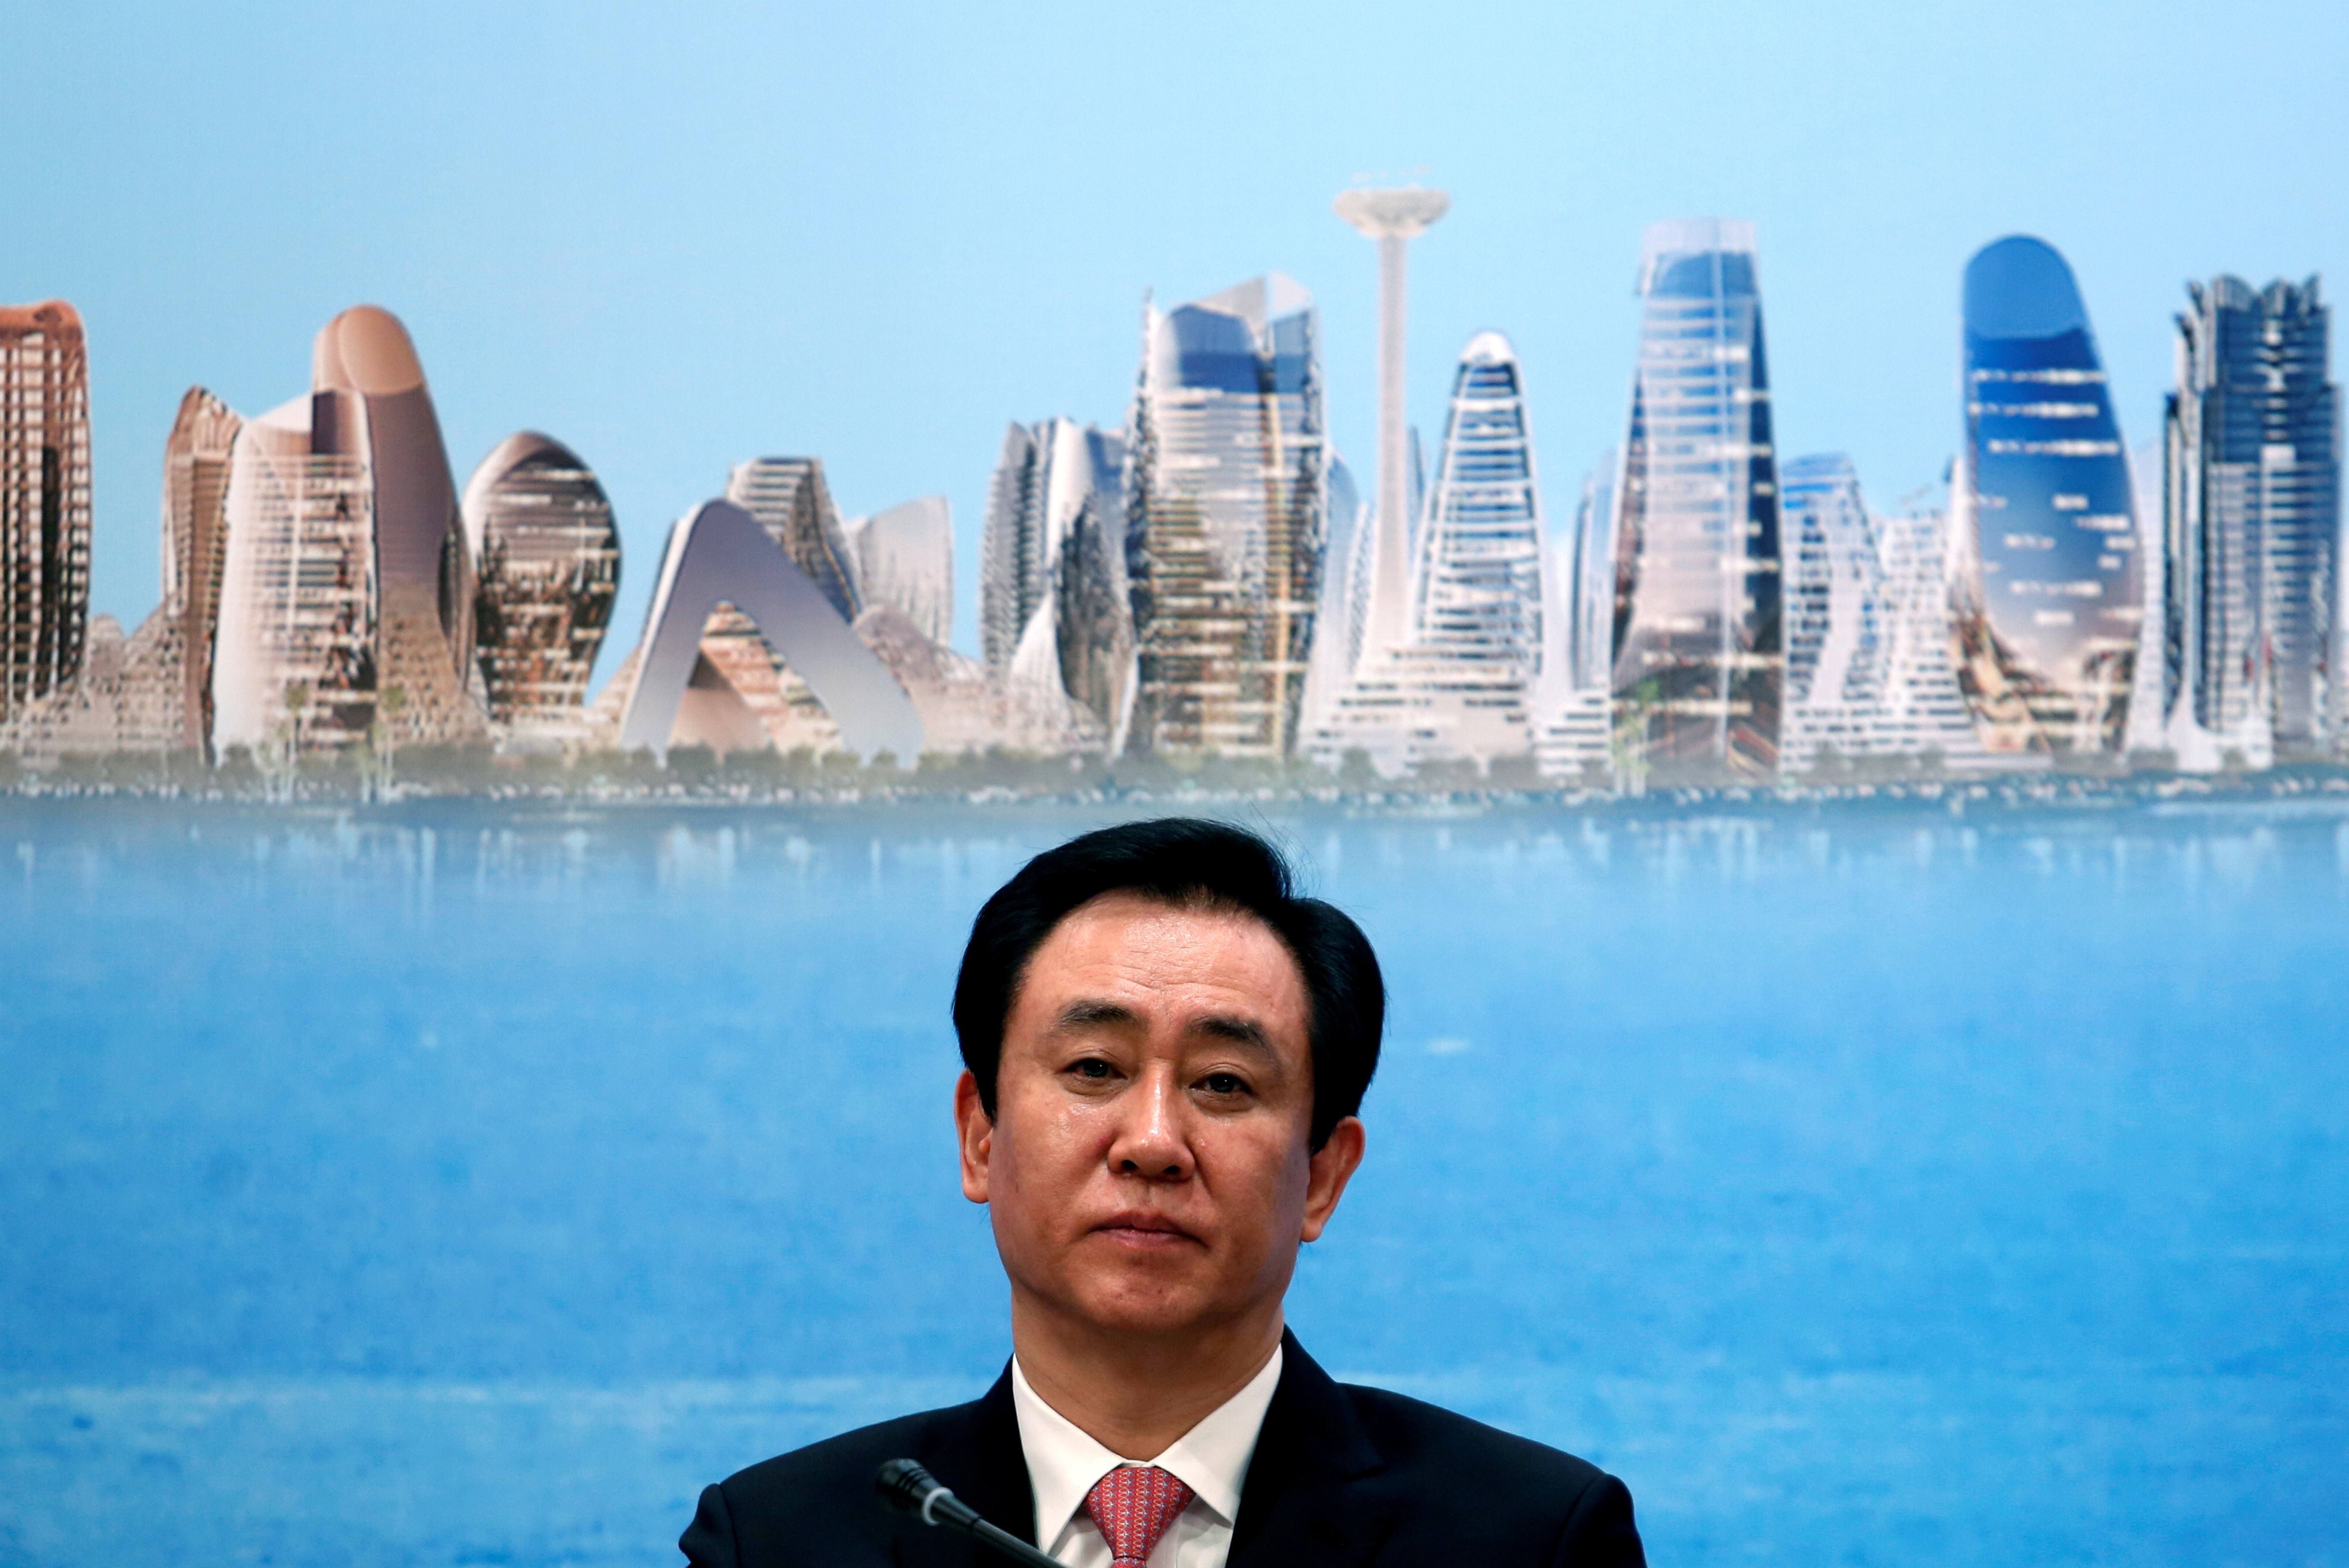 China Evergrande Group Chairman Hui Ka Yan attends a news conference on the property developer's annual results in Hong Kong, China March 28, 2017. REUTERS/Bobby Yip/File Photo